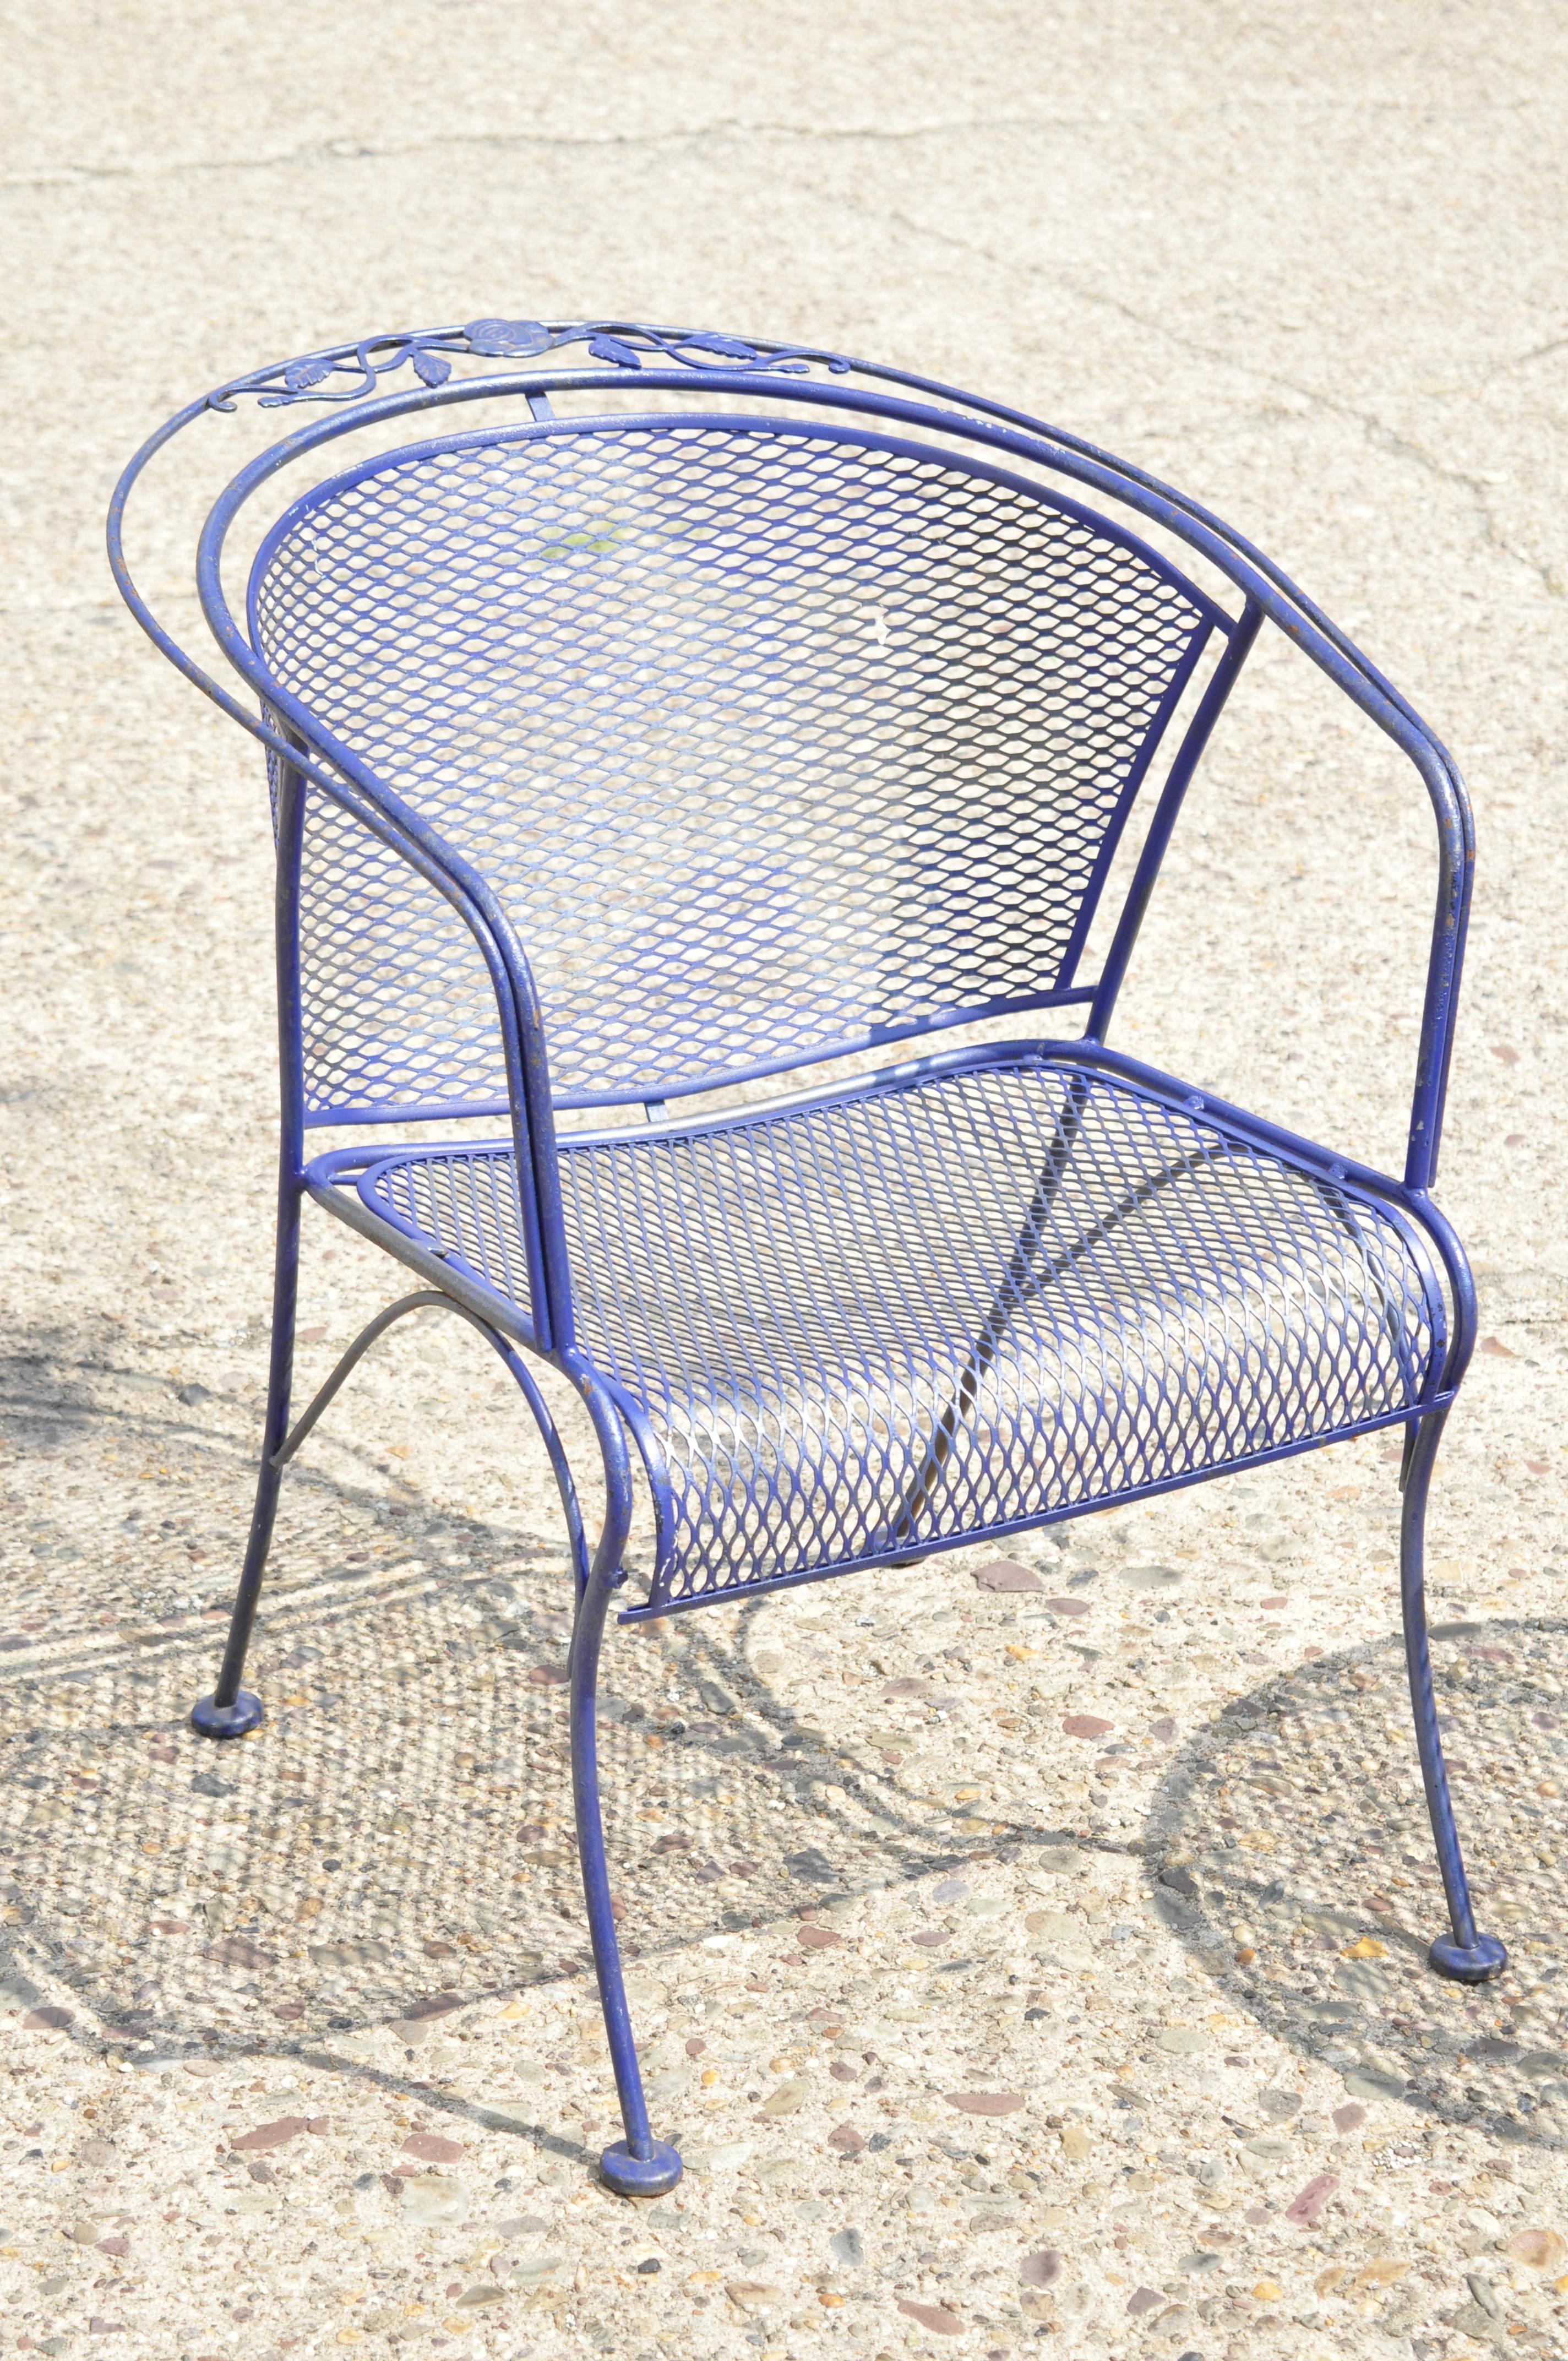 20th century Woodard barrel back blue wrought iron rose pattern garden armchairs and side table set. Set includes (2) armchairs, (1) round side table, mesh tops, wrought iron construction, original label, very nice vintage set, circa mid-late 20th